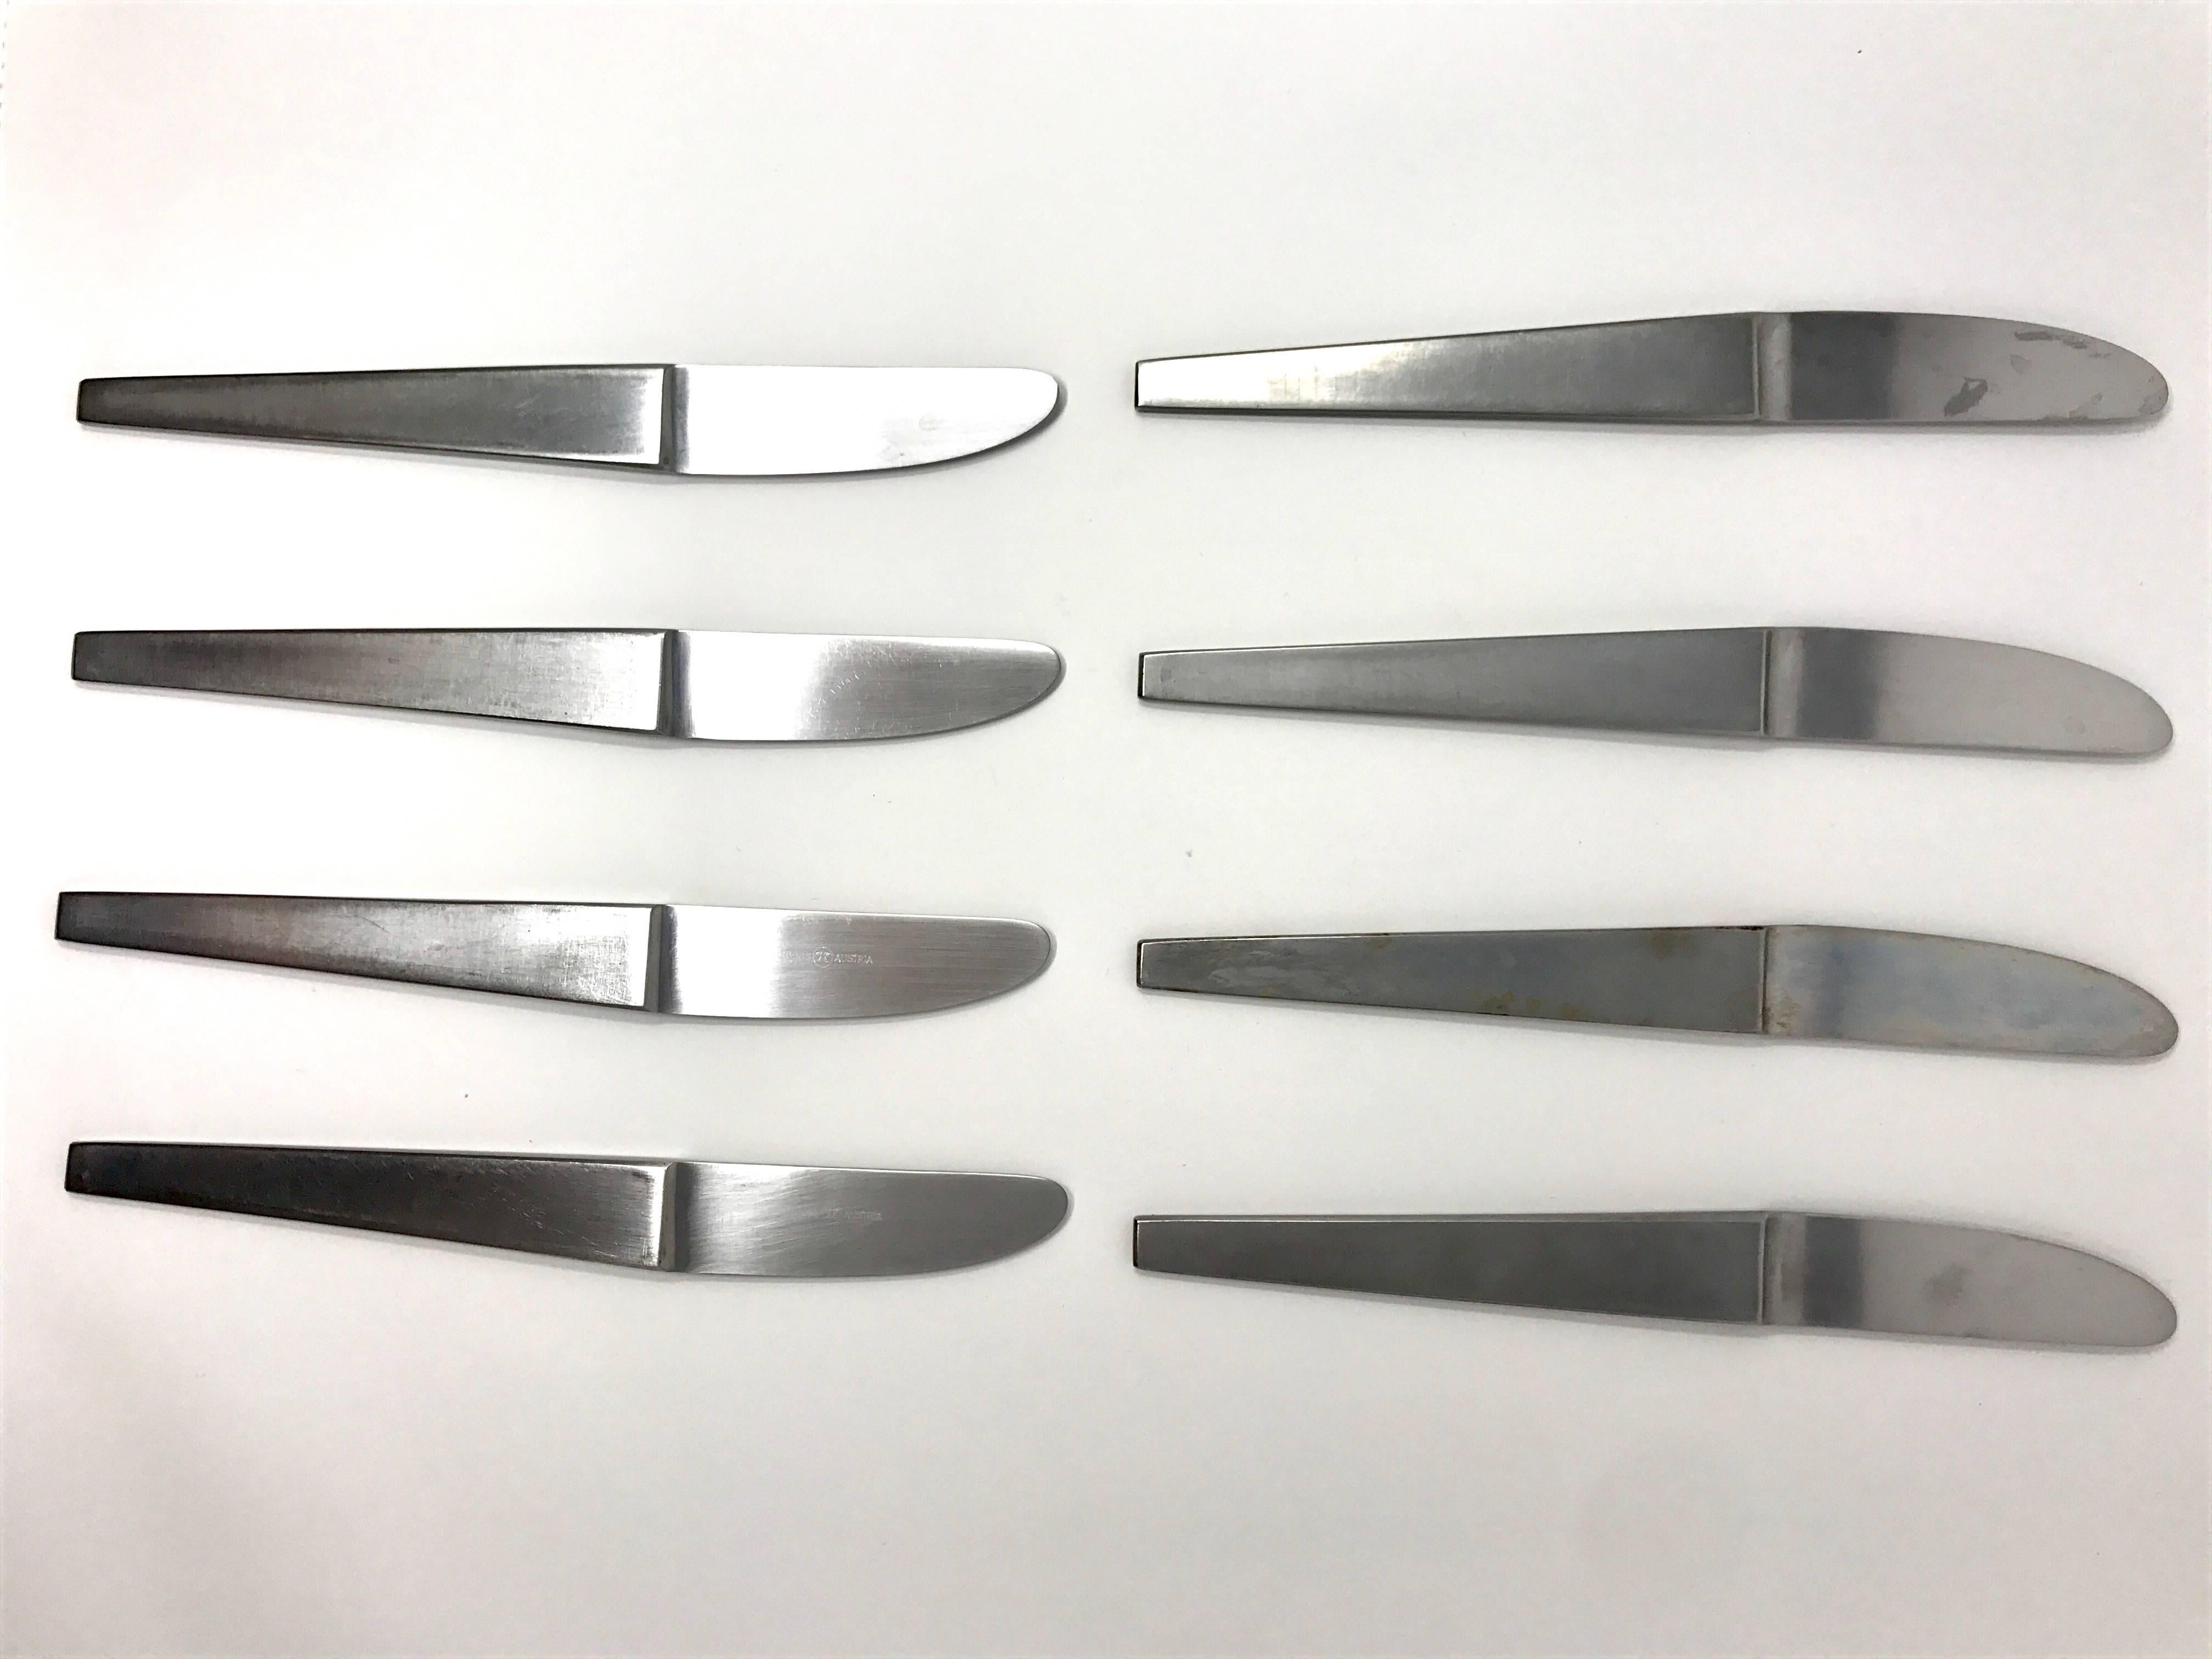 1950s 44-piece model 2060 flatware set by Carl Aubo¨ck for Amboss, Austria. 

The set consists of eight dinner knives, two dinner forks, nine tablespoons, seven butter knives, 14 salad forks, and four teaspoons. Each piece is marked with the